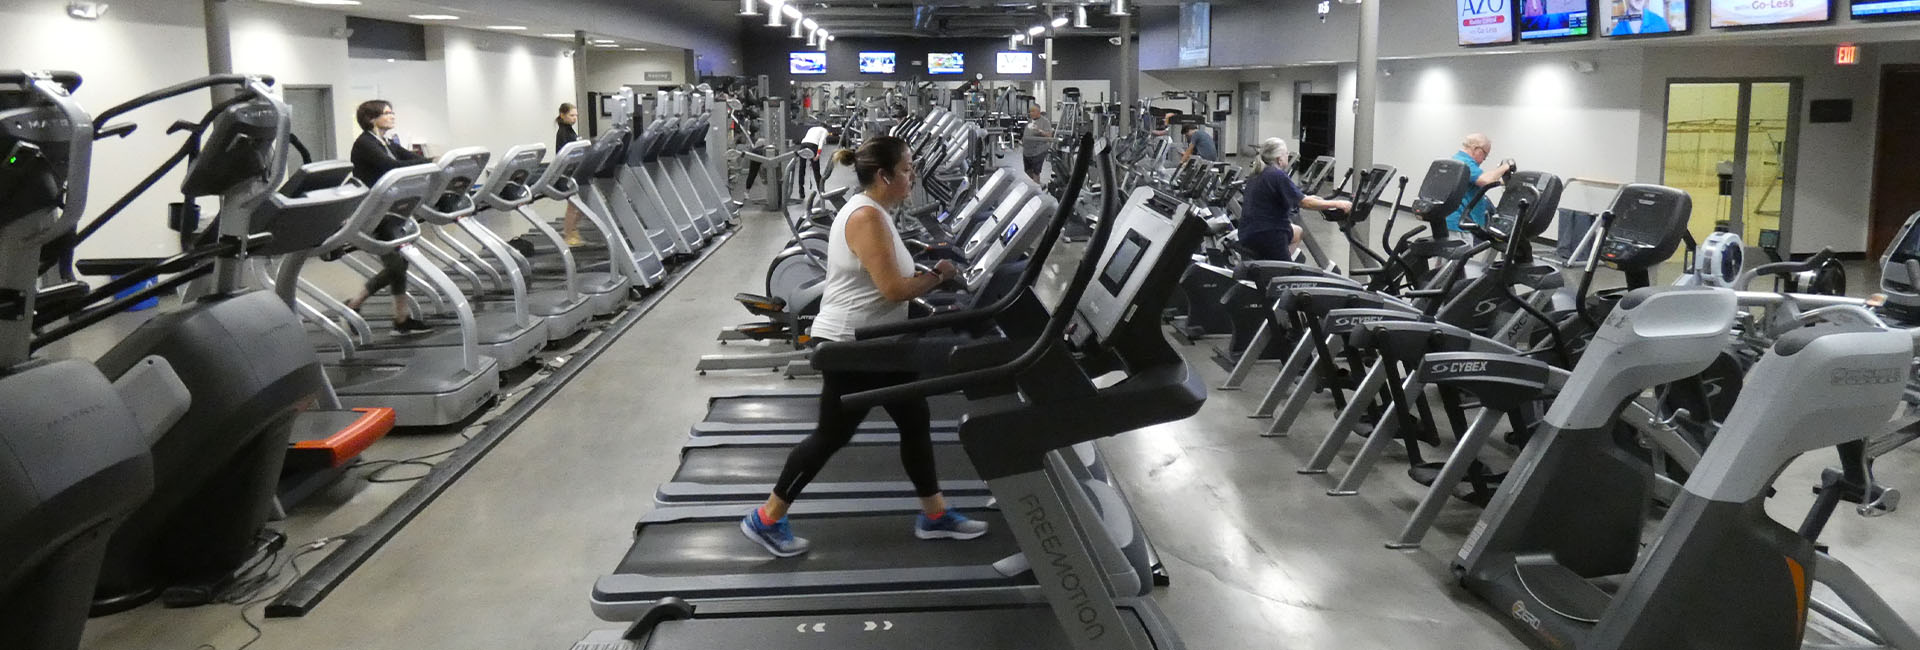 woman using a treadmill in a large cardio floor